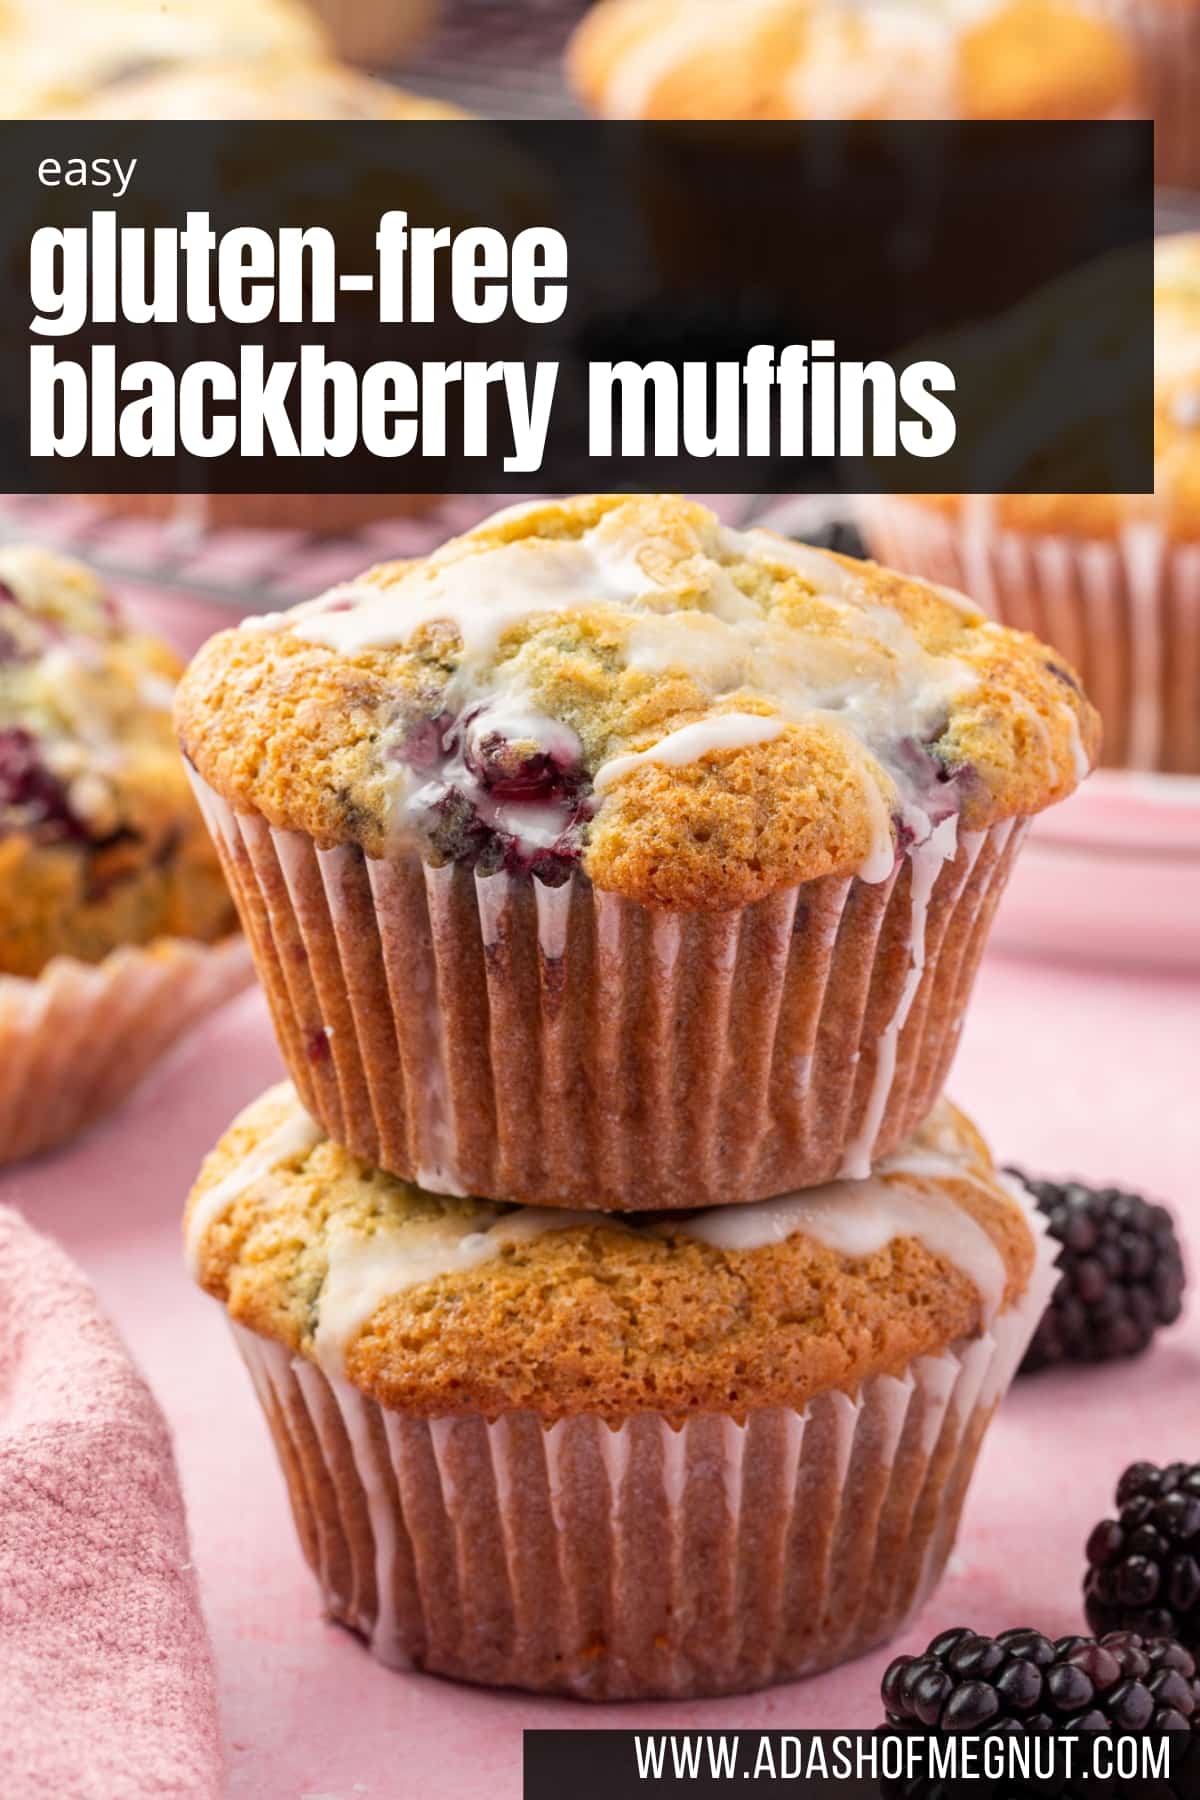 A stack of two lemon glazed blackberry muffins with more muffins in the background.